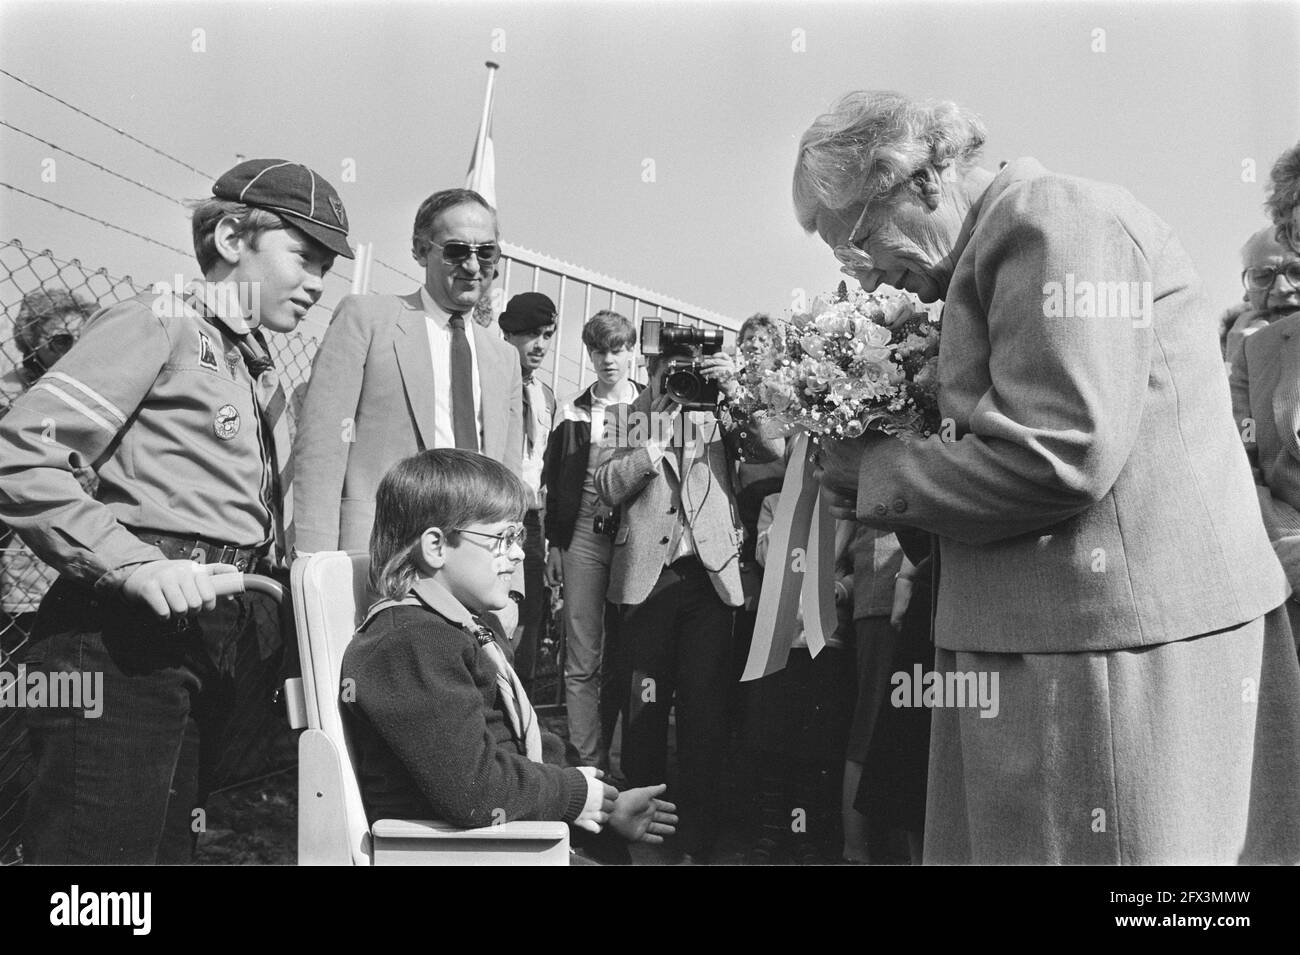 Princess Juliana opens clubhouse sea scout group Willem de Zwijger in Rotterdam; Princess Juliana receives flowers from Diane van Verre, April 14, 1984, FLOWERS, openings, scouting, princesses, scouting, The Netherlands, 20th century press agency photo, news to remember, documentary, historic photography 1945-1990, visual stories, human history of the Twentieth Century, capturing moments in time Stock Photo